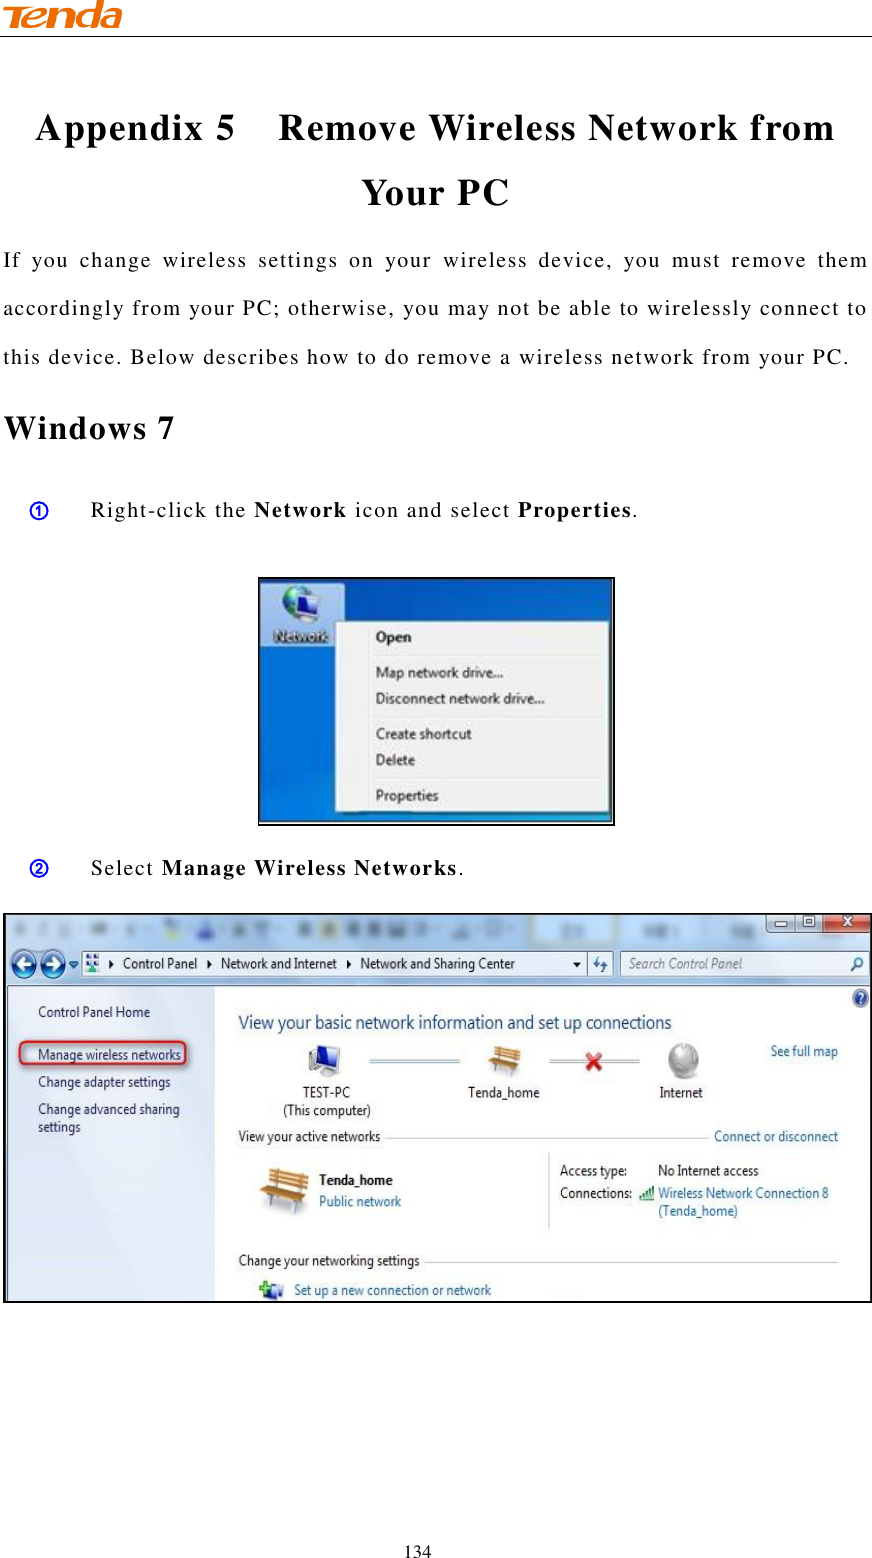                                    134 Appendix 5  Remove Wireless Network from Your PC If  you  change  wireless  settings  on  your  wireless  device,  you  must  remove  them accordingly from your PC; otherwise, you may not be able to wirelessly connect to this device. Below describes how to do remove a wireless network from your PC.  Windows 7 ① Right-click the Network icon and select Properties.   ② Select Manage Wireless Networks.  